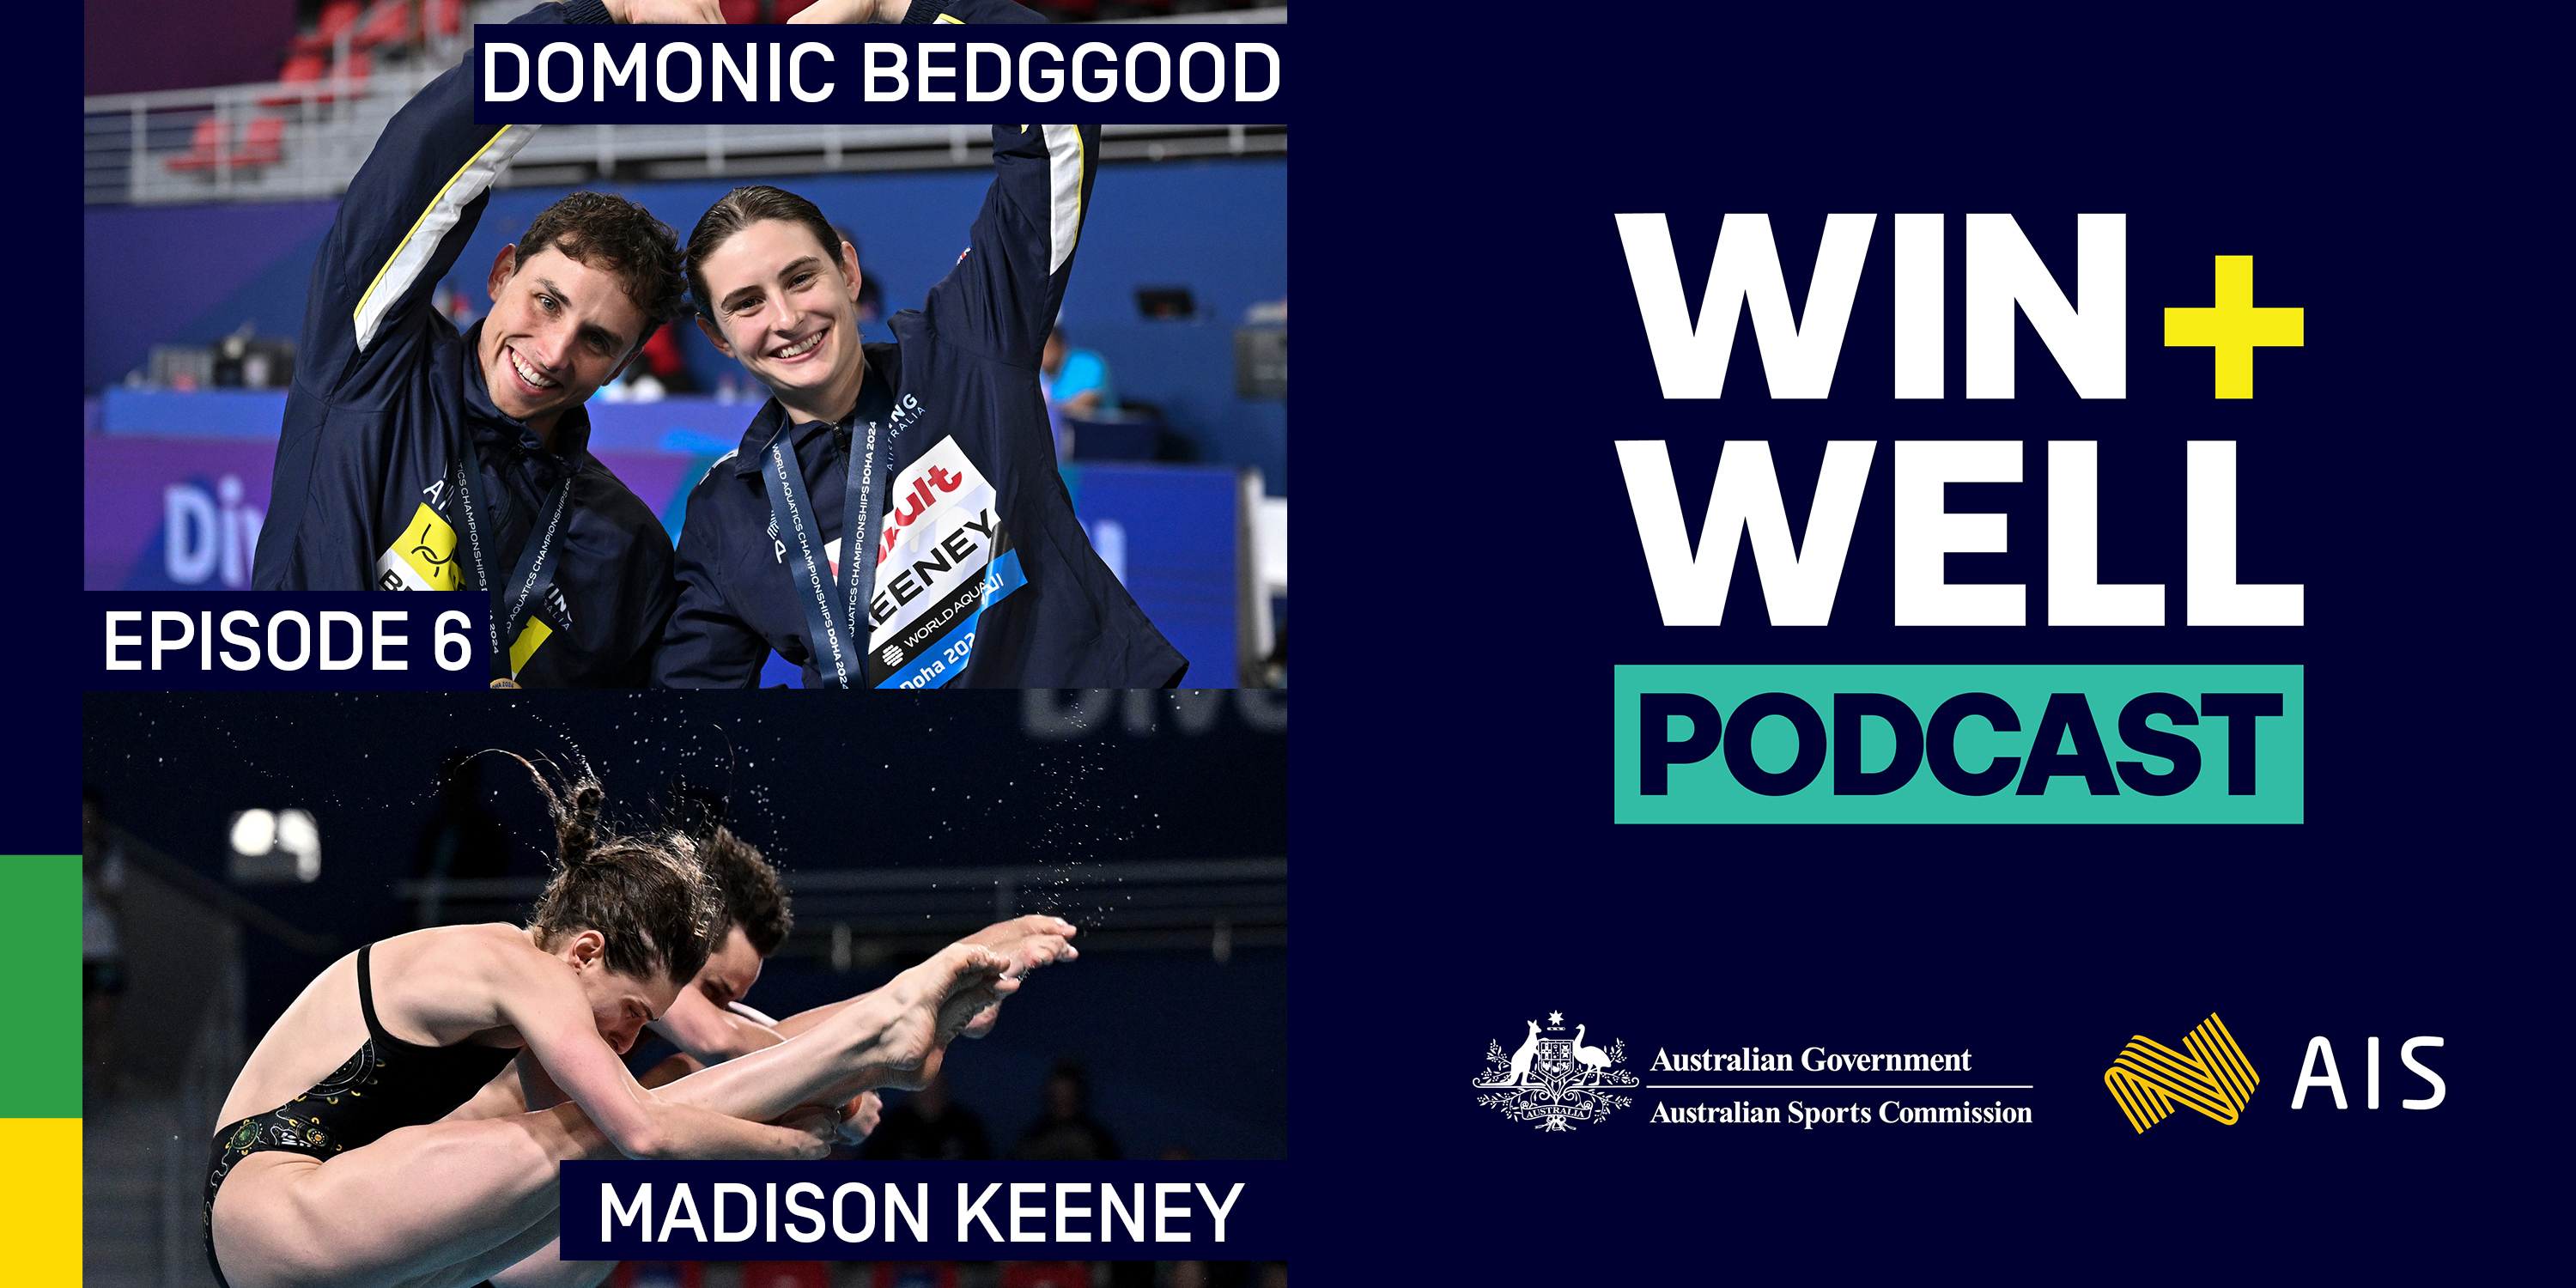 AIS Win Well Podcast Maddison Keeney and Domonic Bedggood